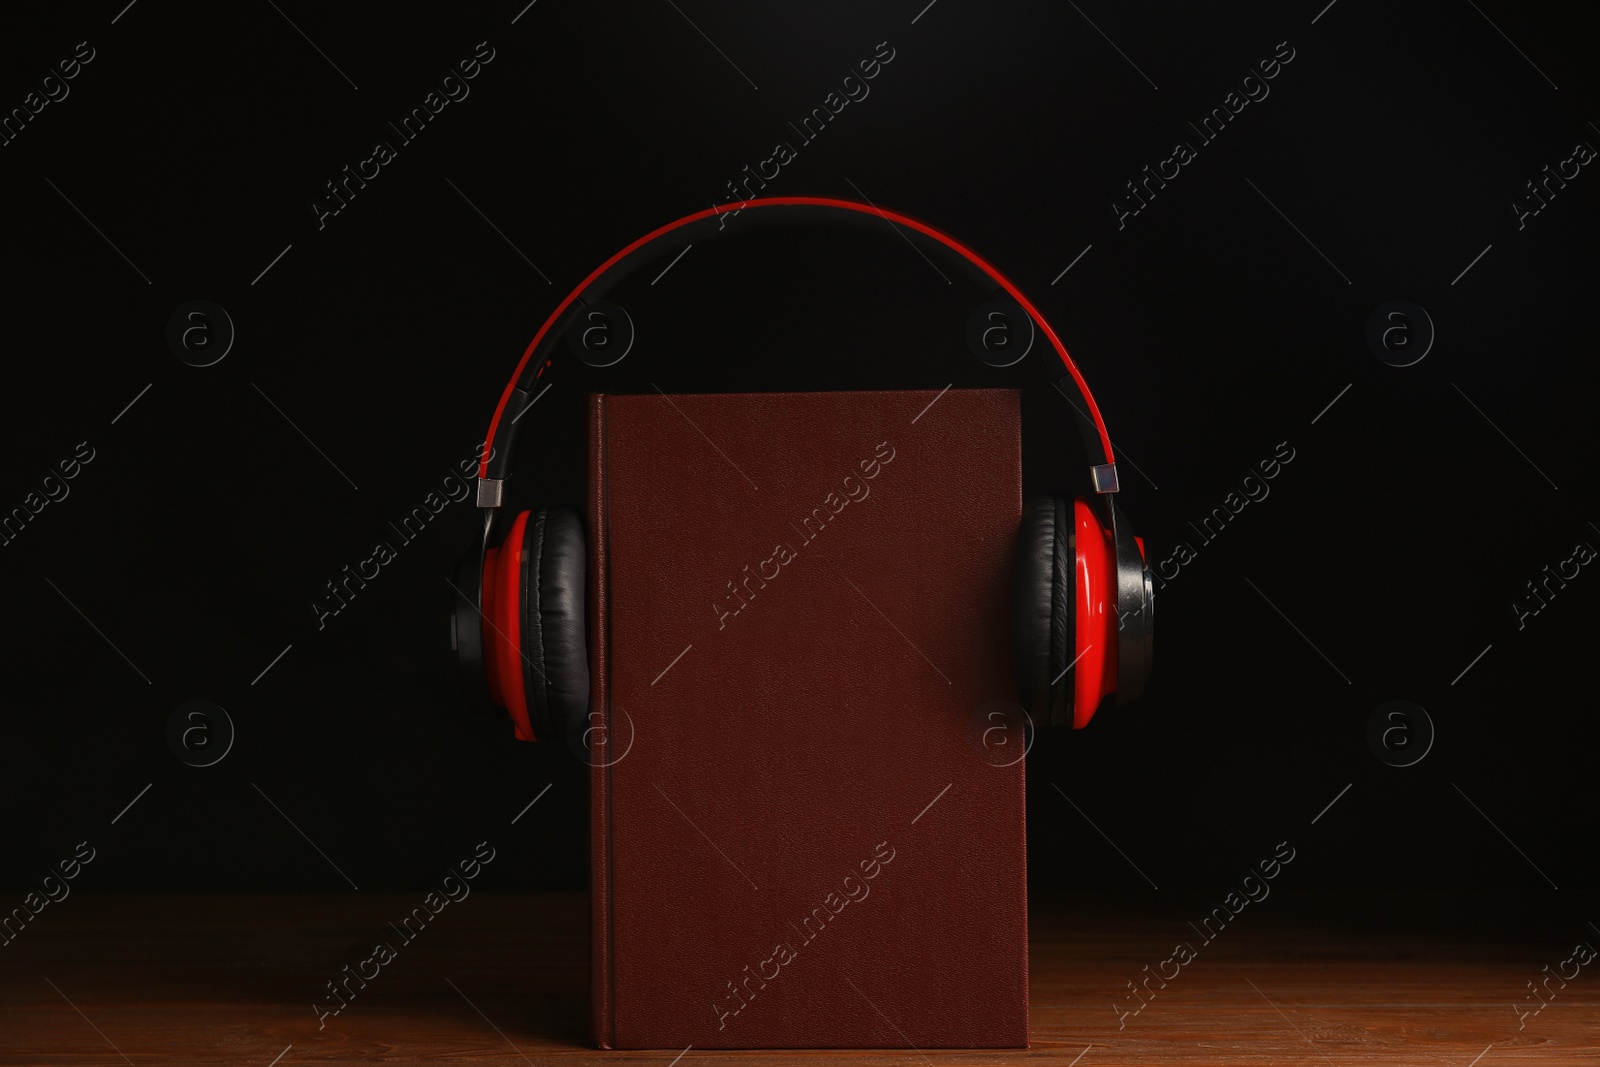 Photo of Headphones and book on wooden table against black background